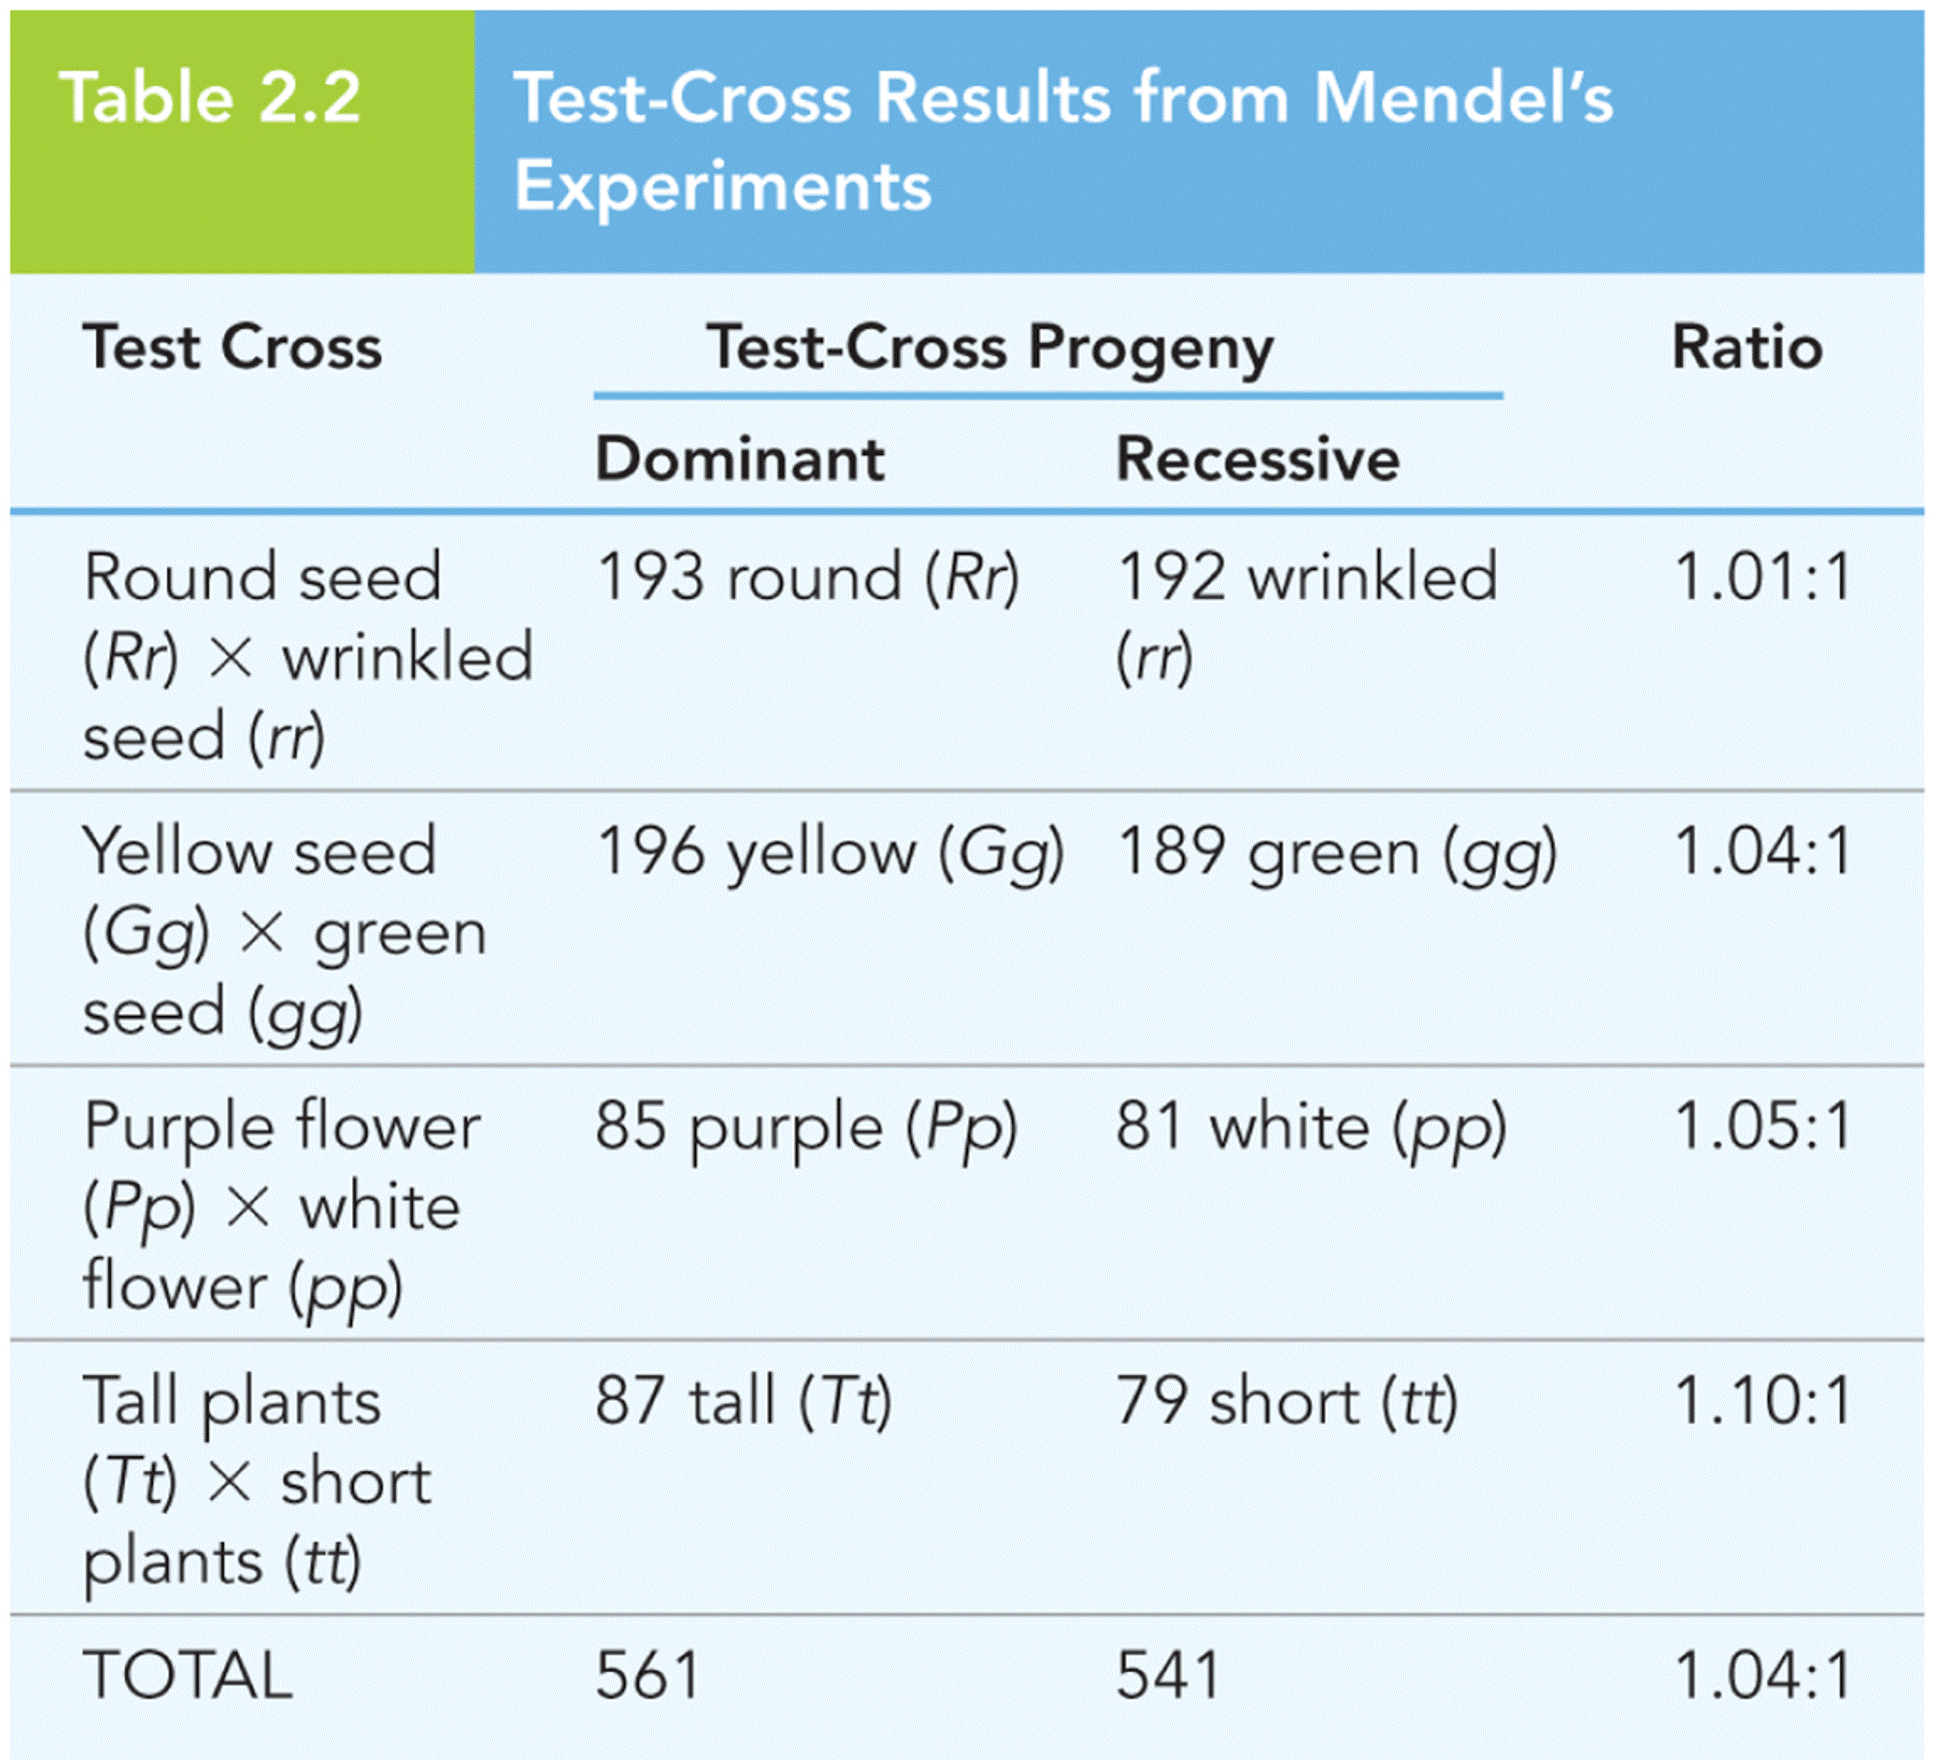 Test-Cross Results from Mendel’s Experiments